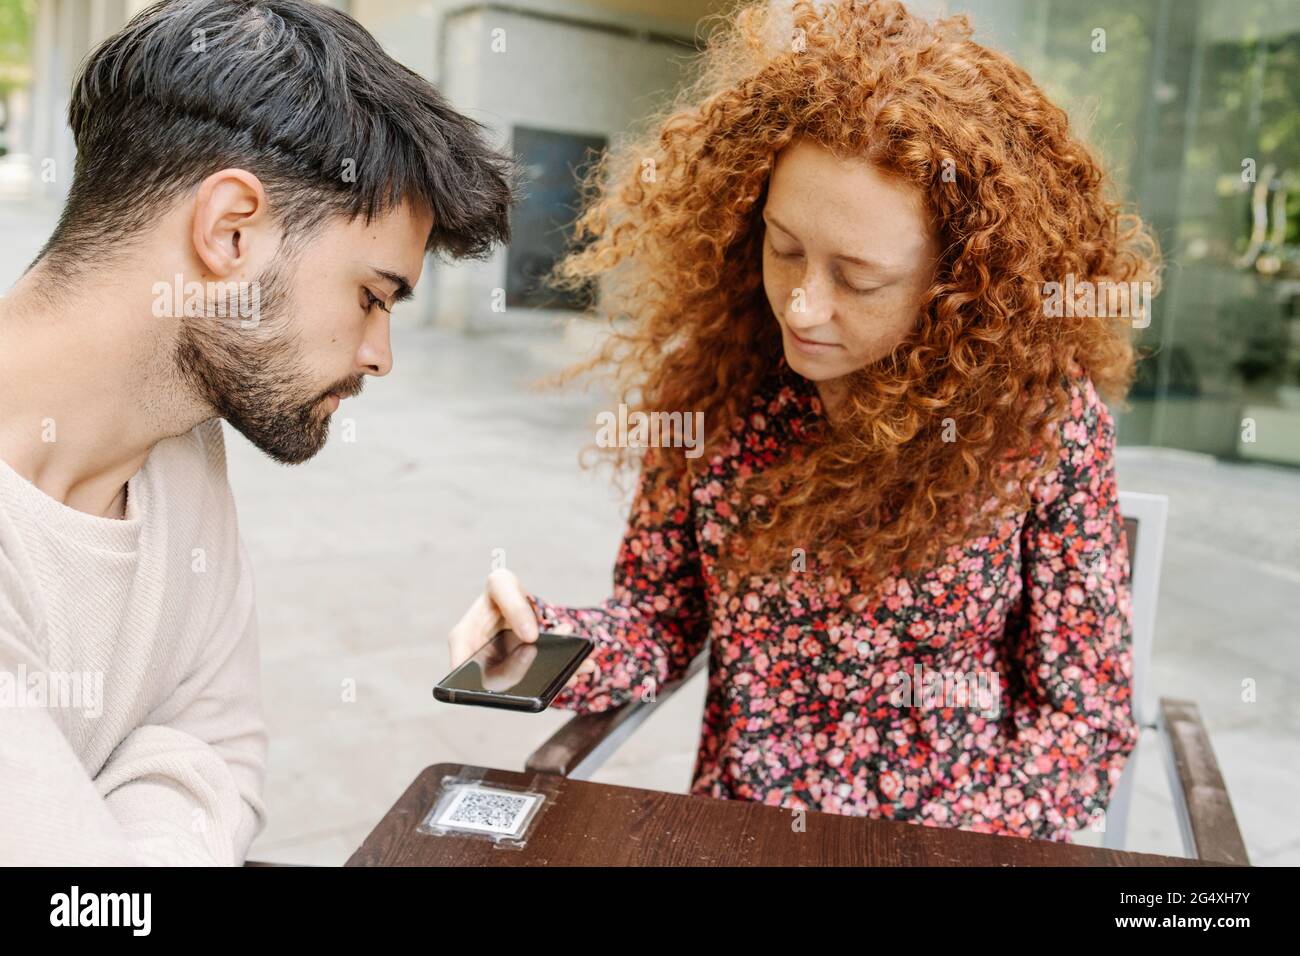 Woman scanning QR code on table in cafe Stock Photo